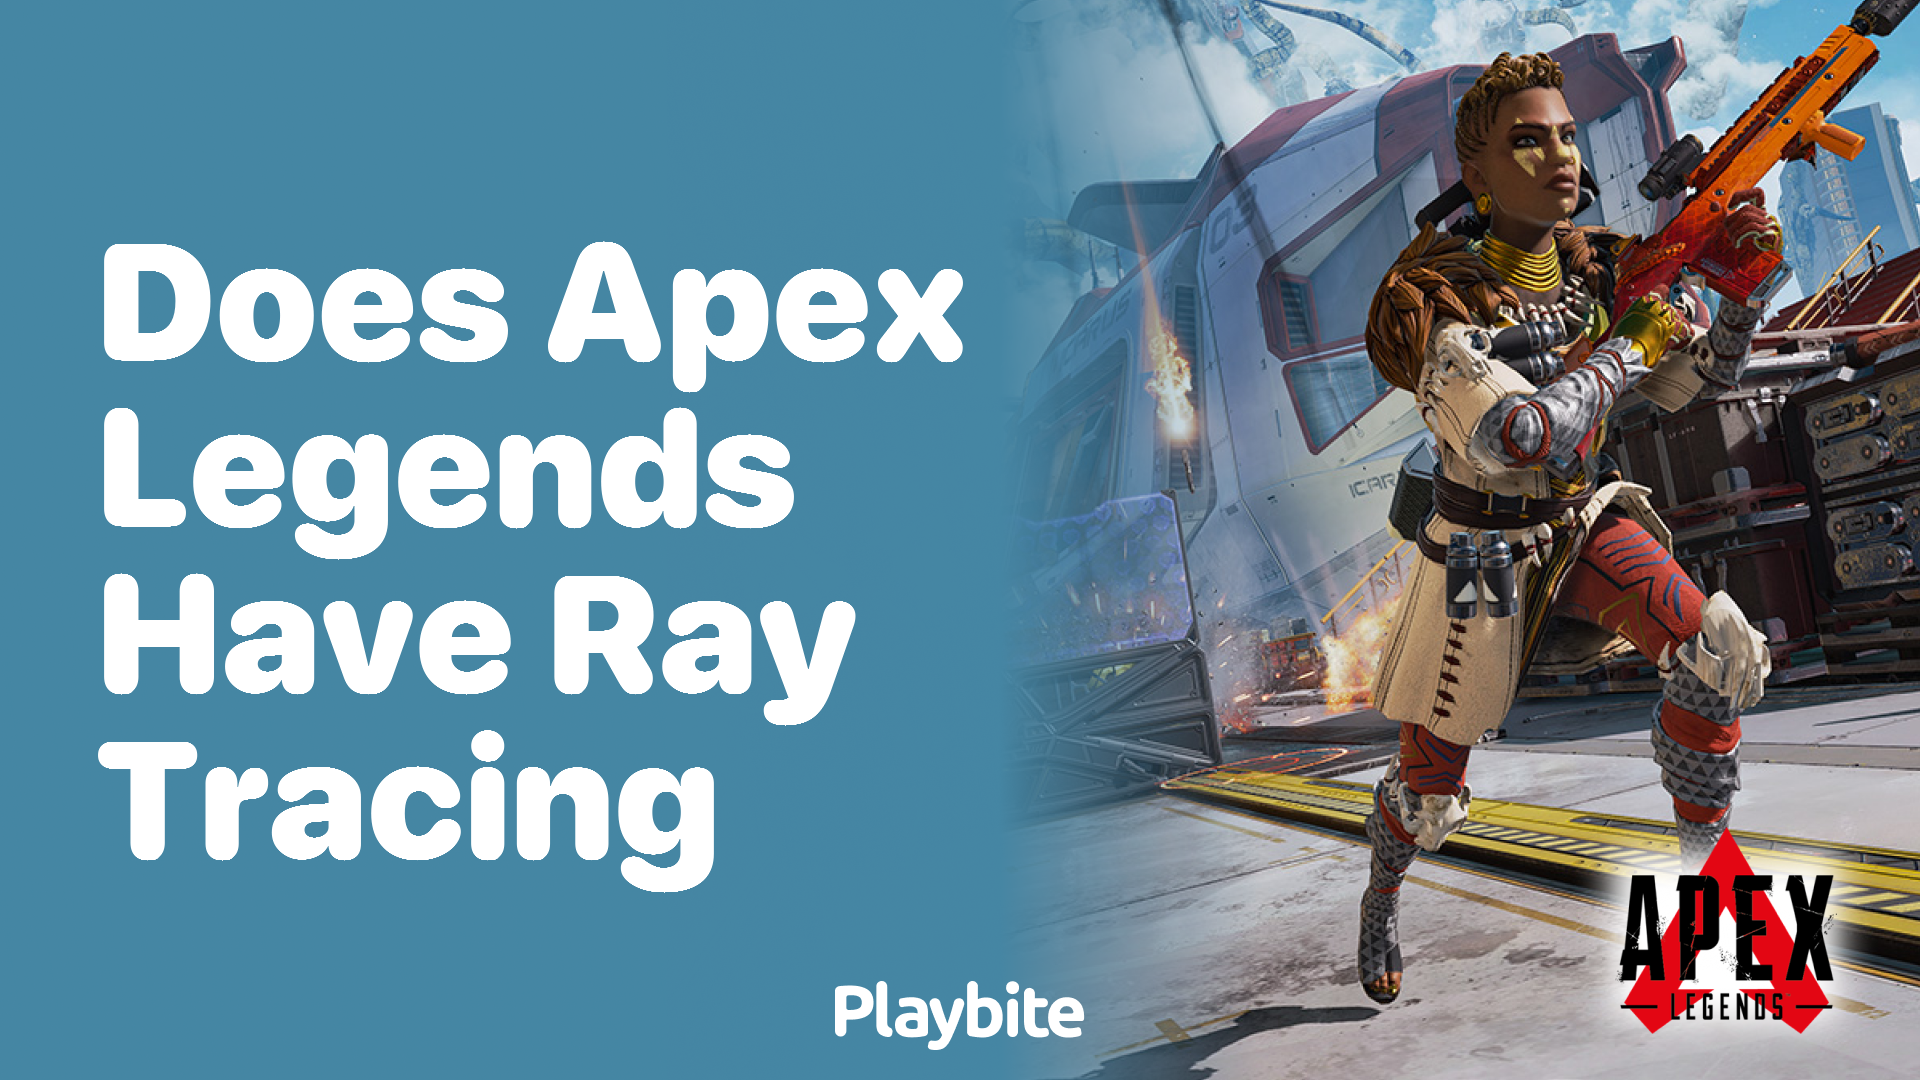 Does Apex Legends Support Ray Tracing?